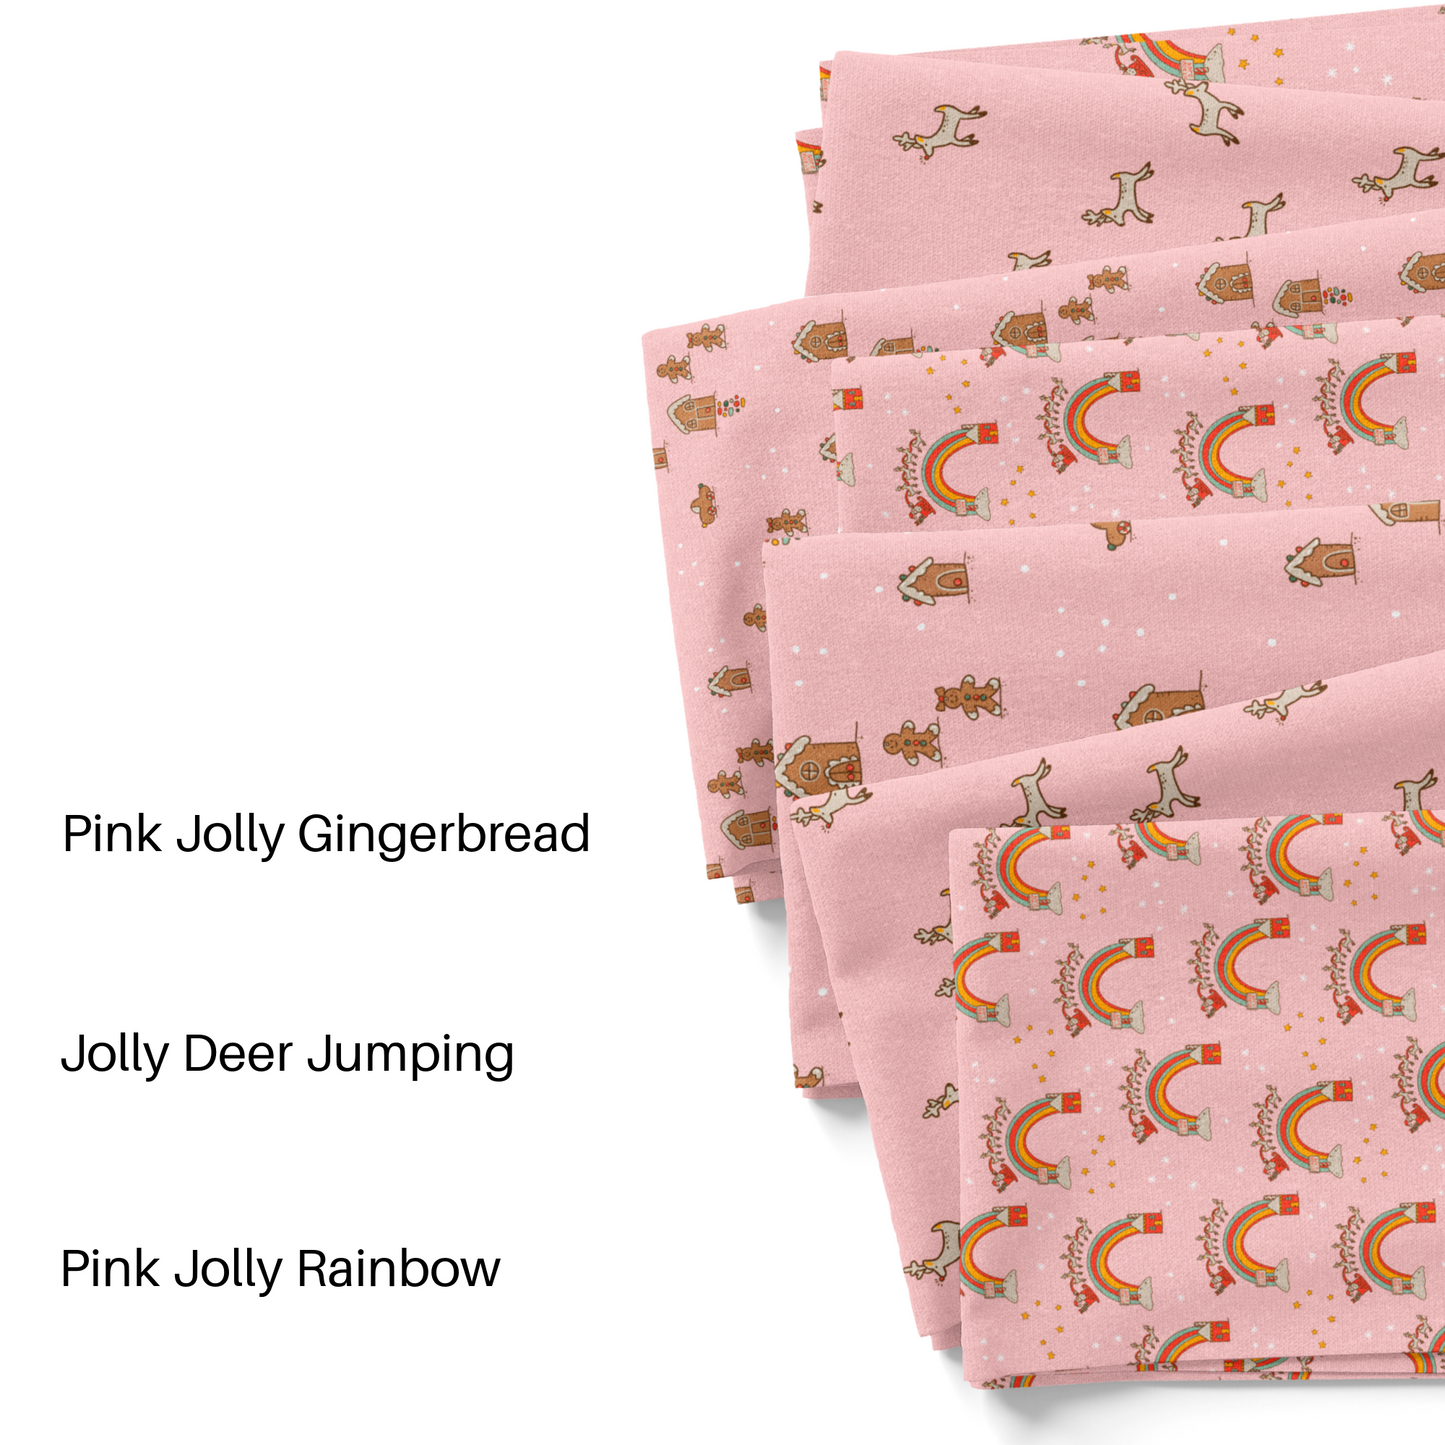 Pink Wild Daisy Christmas collection fabric by the yard swatches.